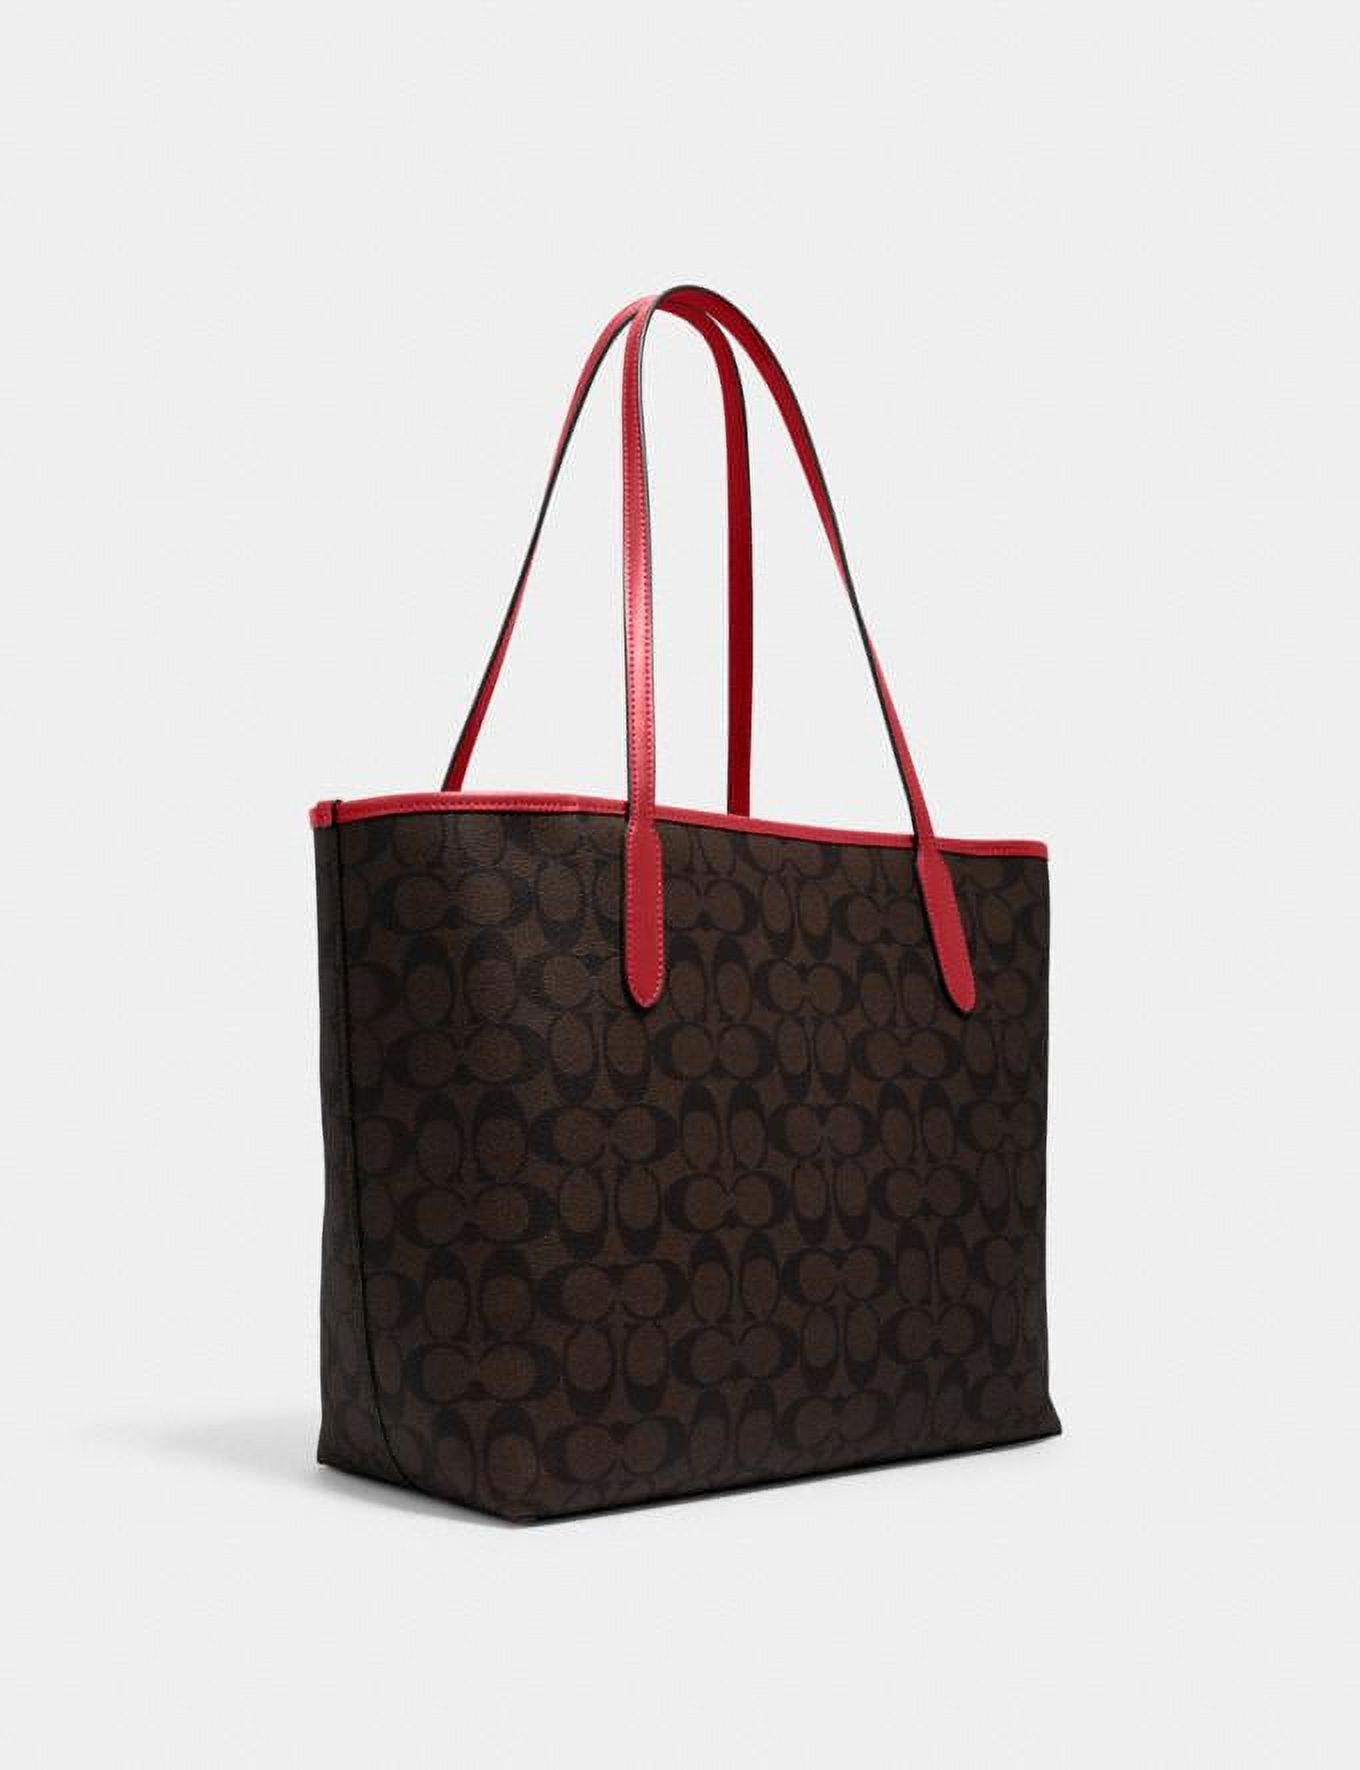 Coach Women's City Tote Handbag In Signature Canvas Leather (Brown / Red) - image 2 of 4